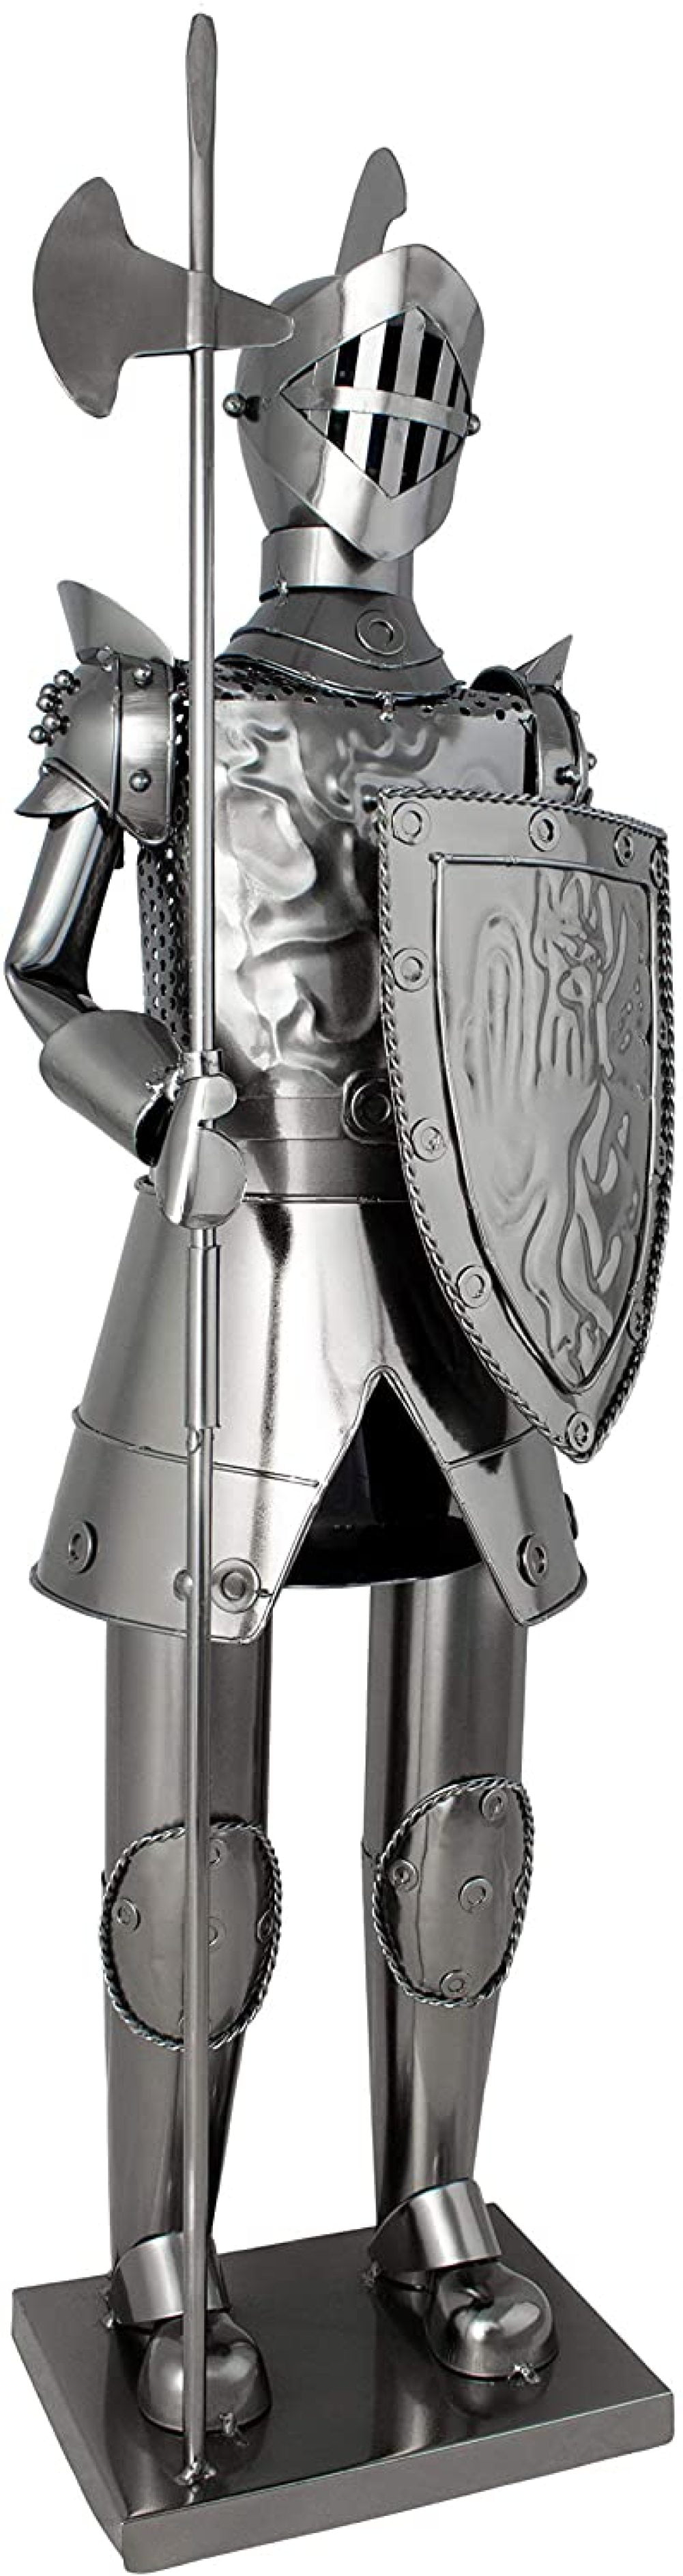 with Greeting Card Table Top Metal Sculpture BRUBAKER Wine Bottle Holder Knight 